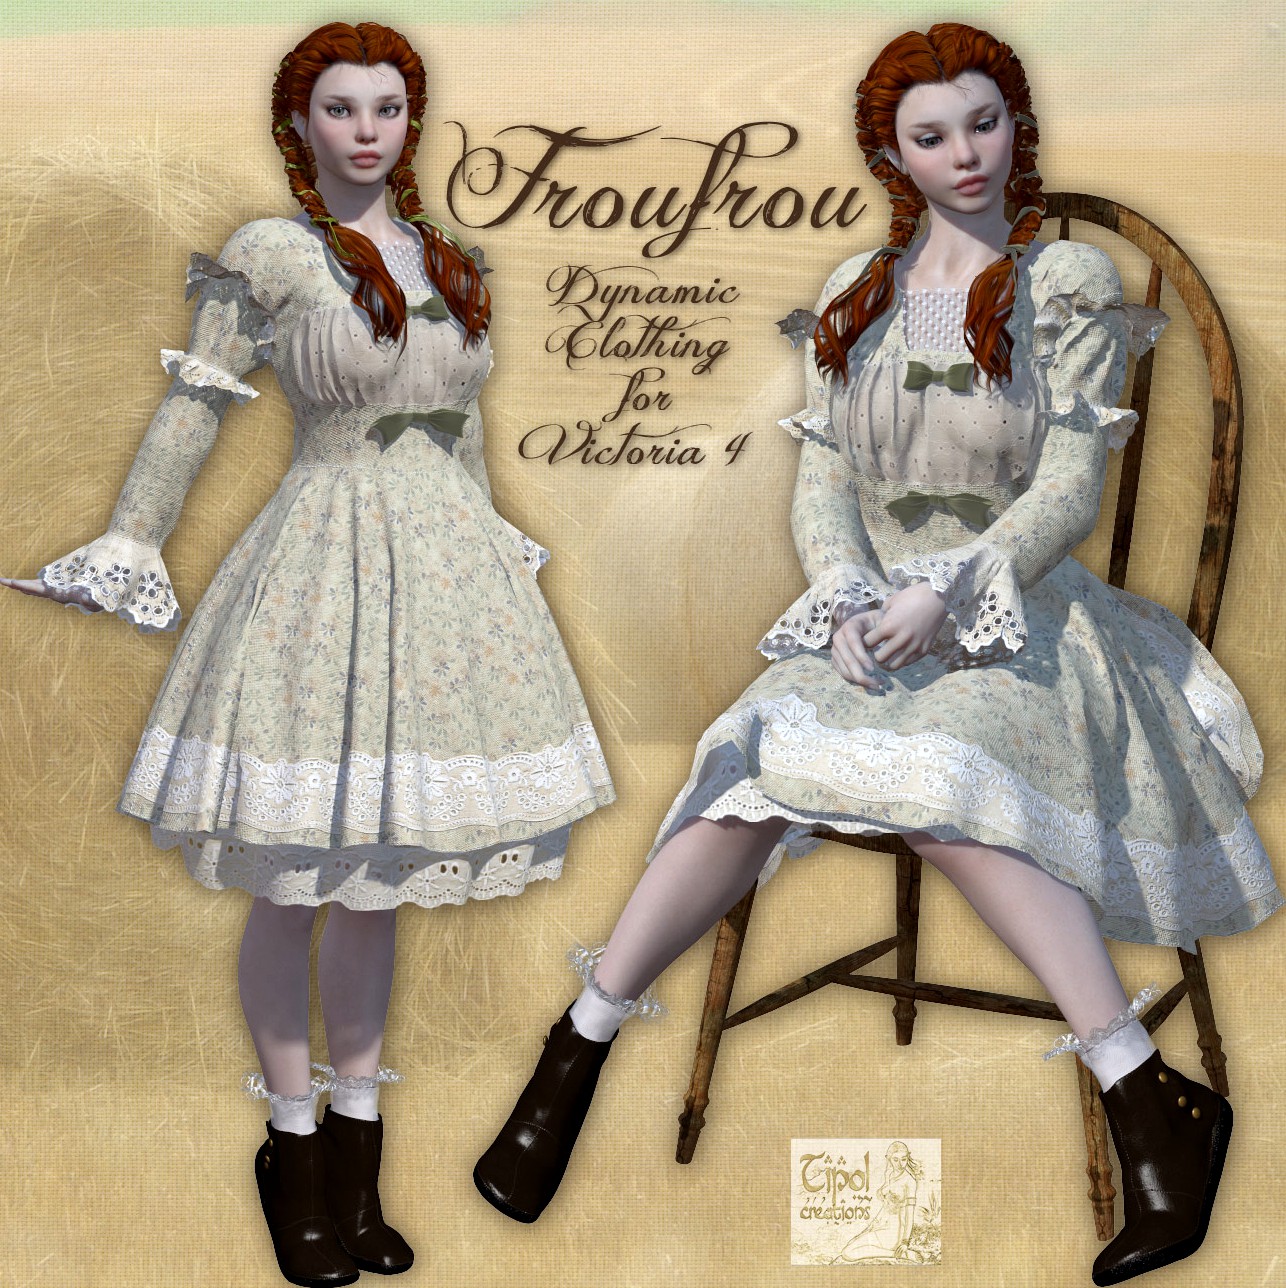 Froufrou_Dynamic Clothing for Victoria 4